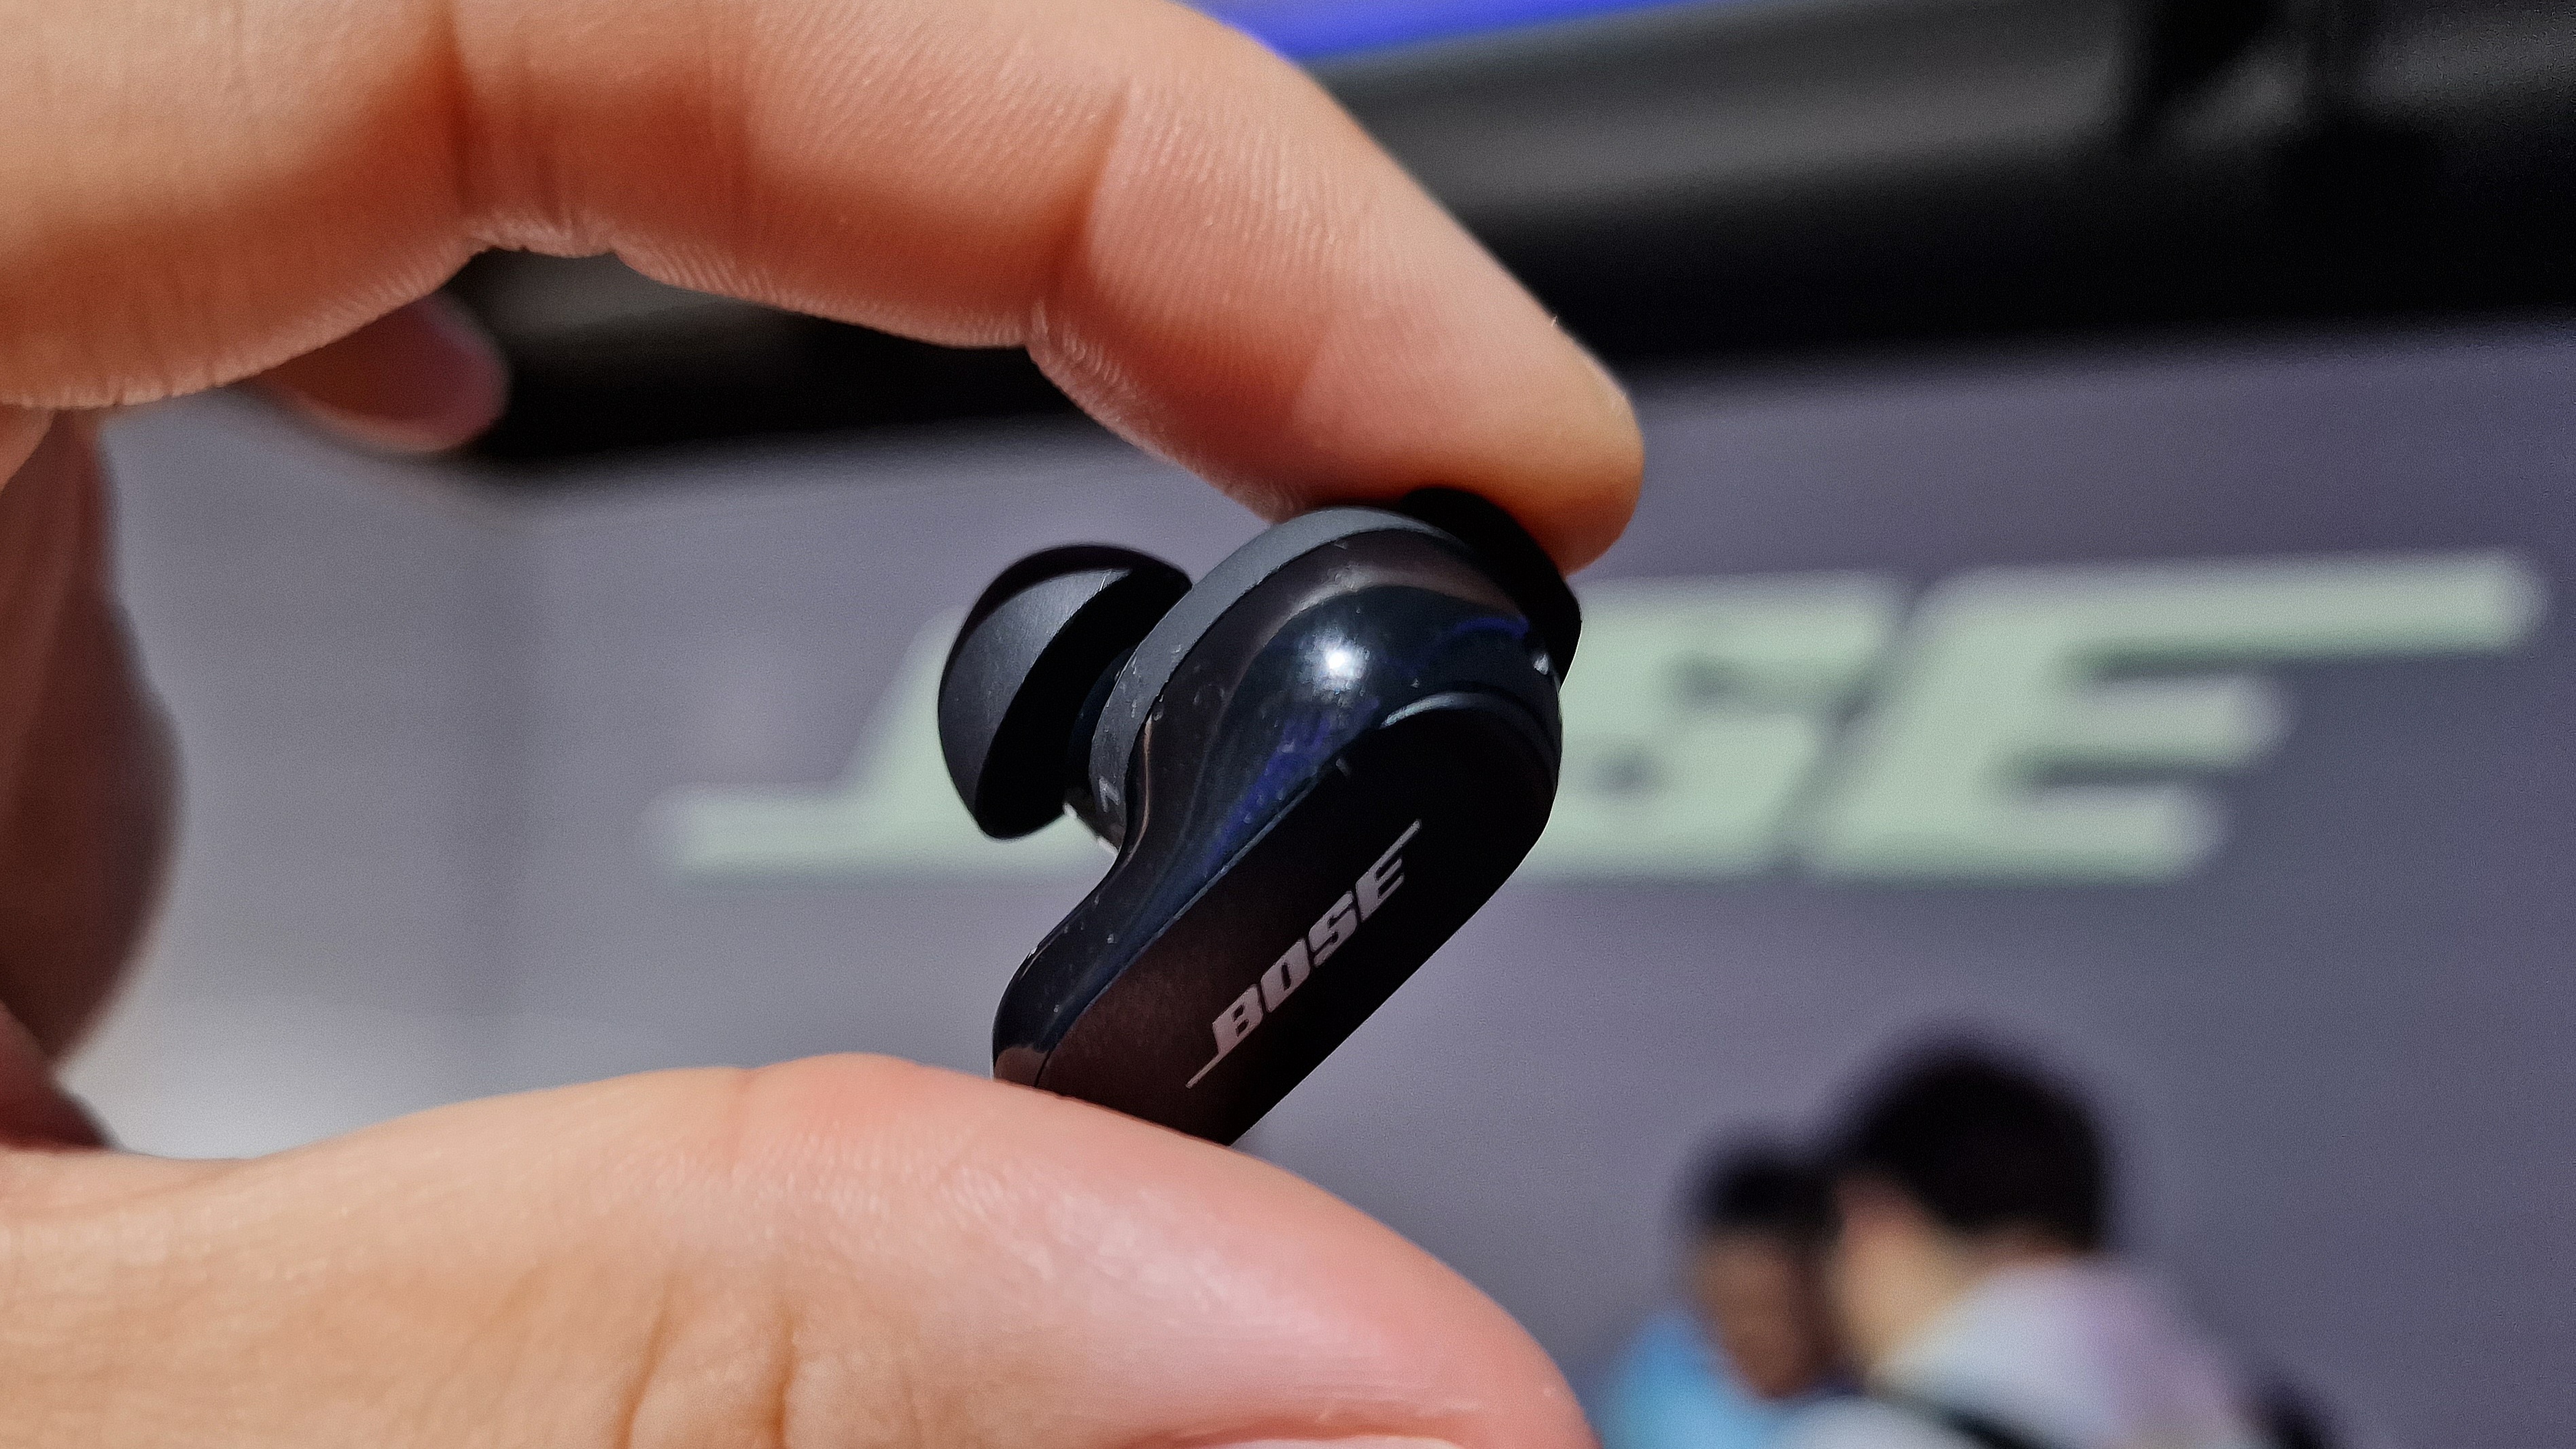 Sorry AirPods Pro 2, but I'm buying Bose's new ANC true wireless earbuds  instead